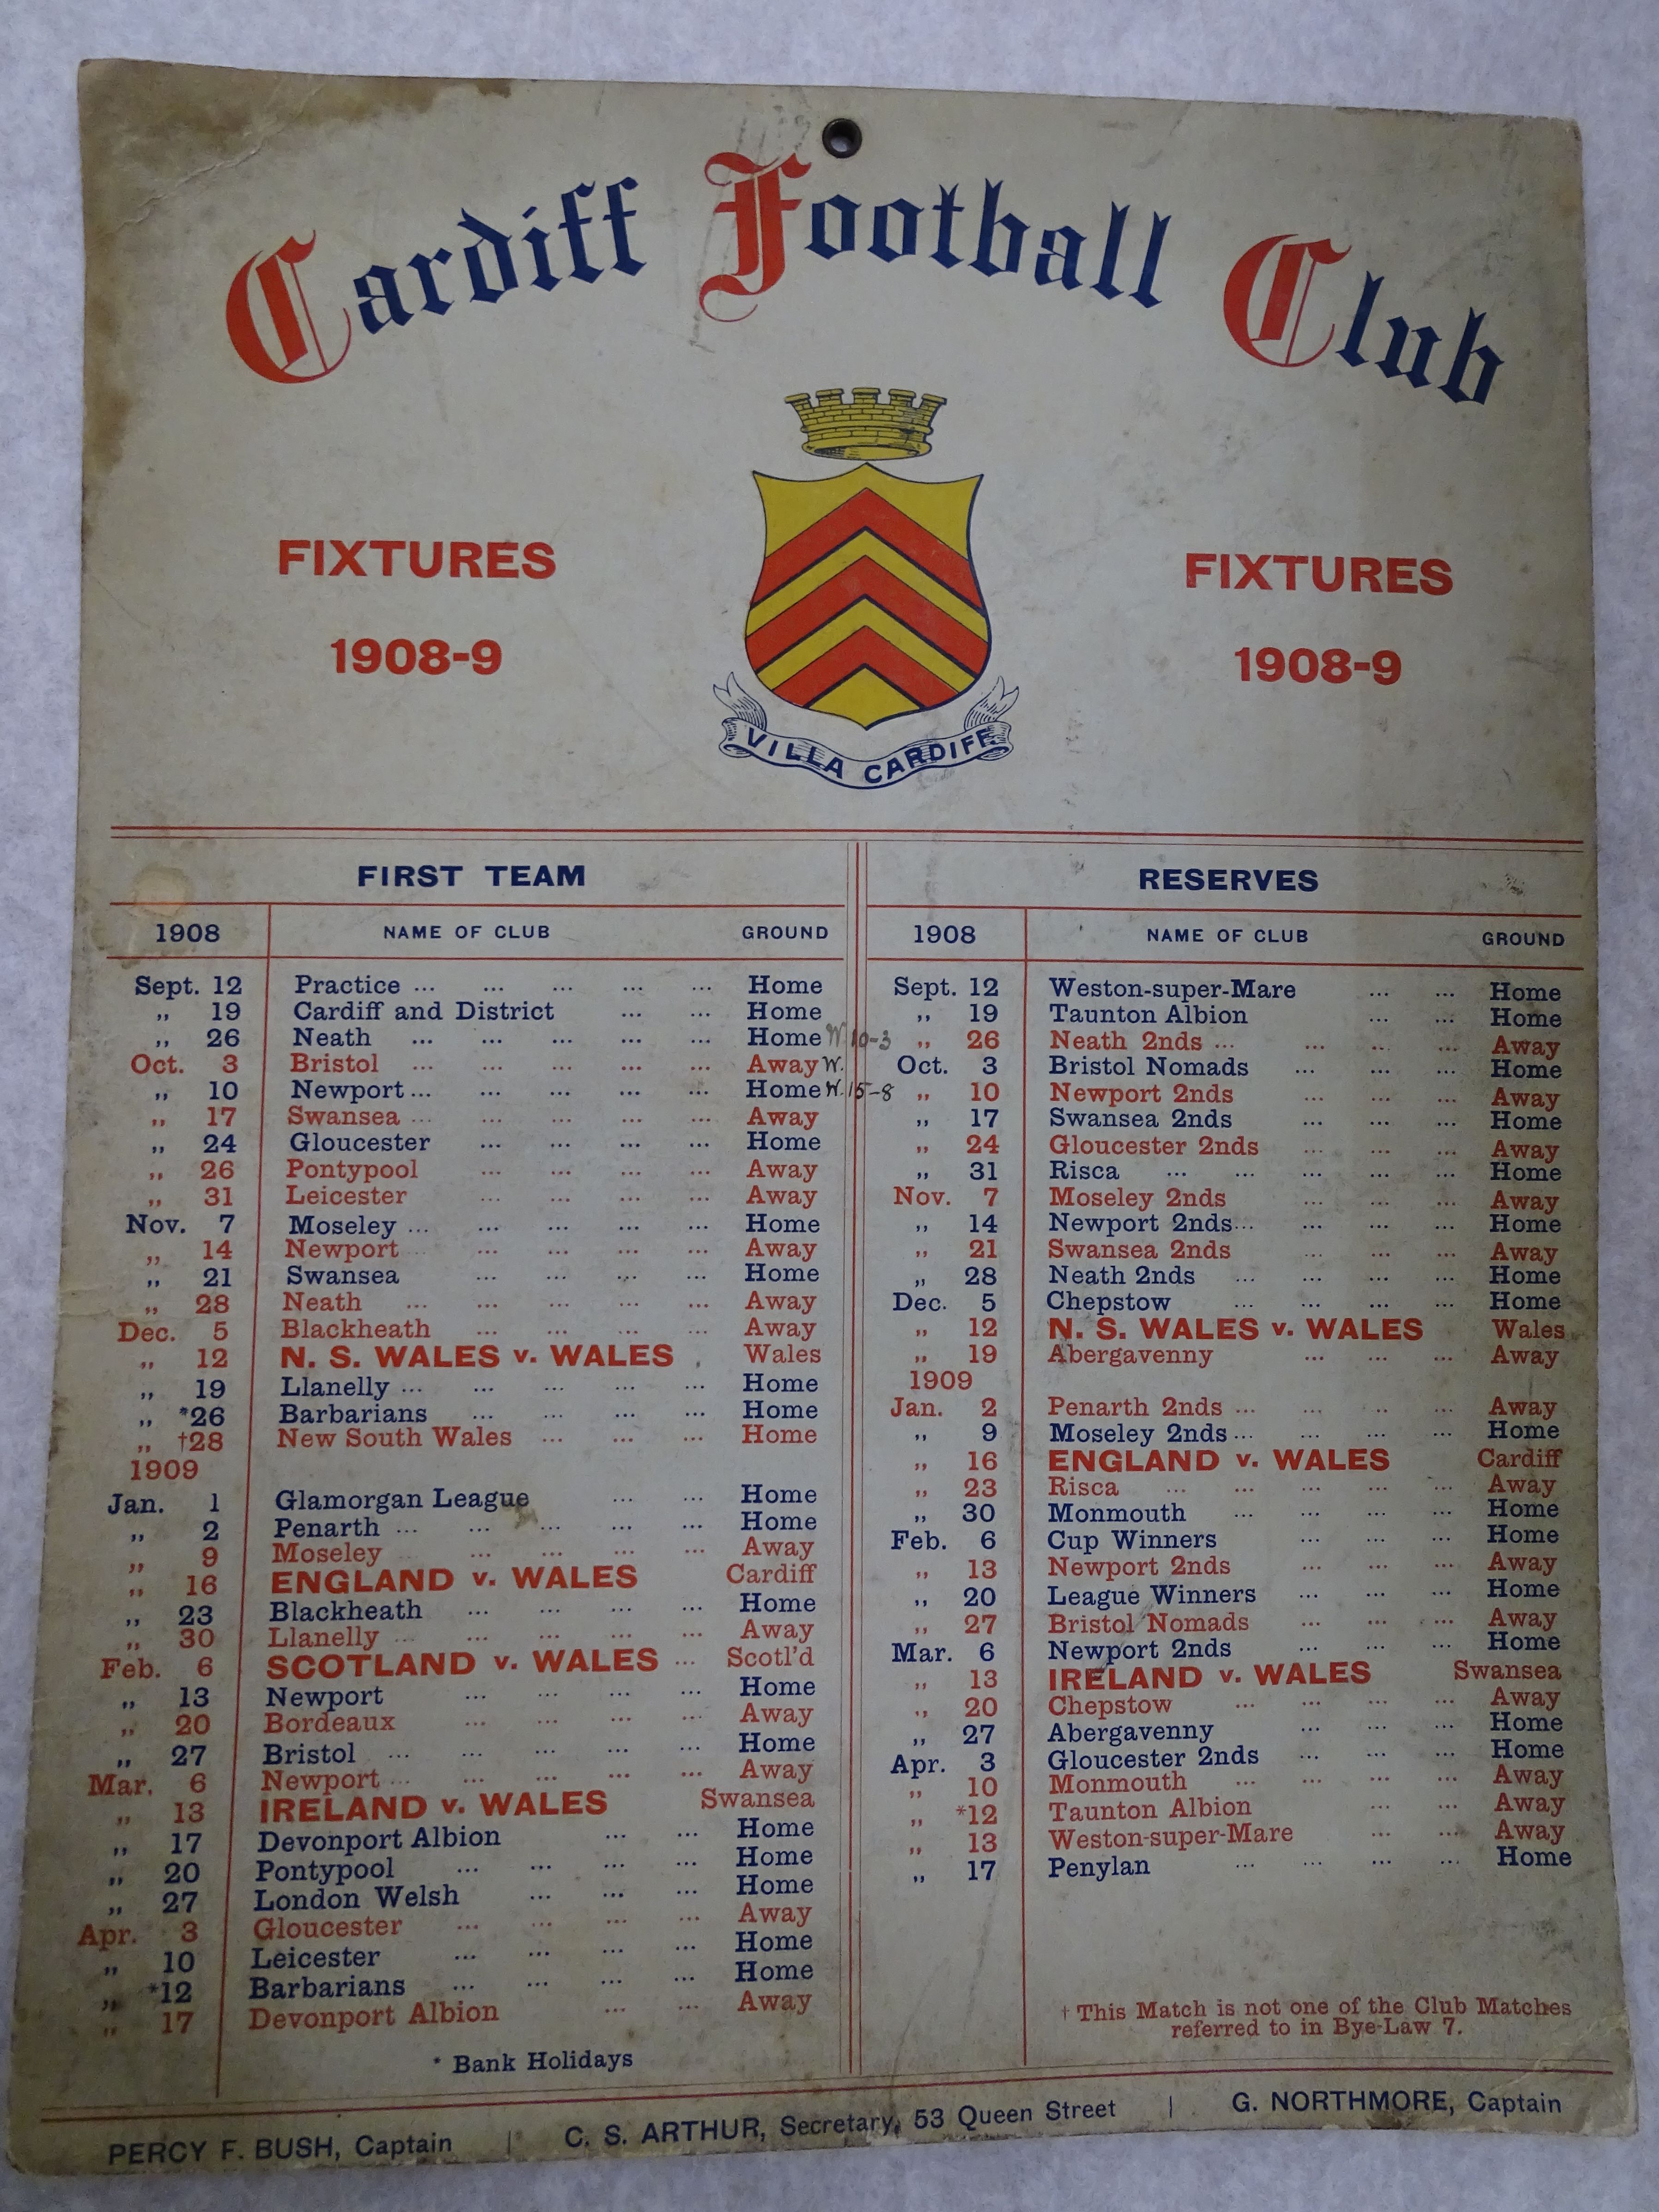 Fixture List - Cardiff Football Club 1908/09 - Cardiff Rugby Museum